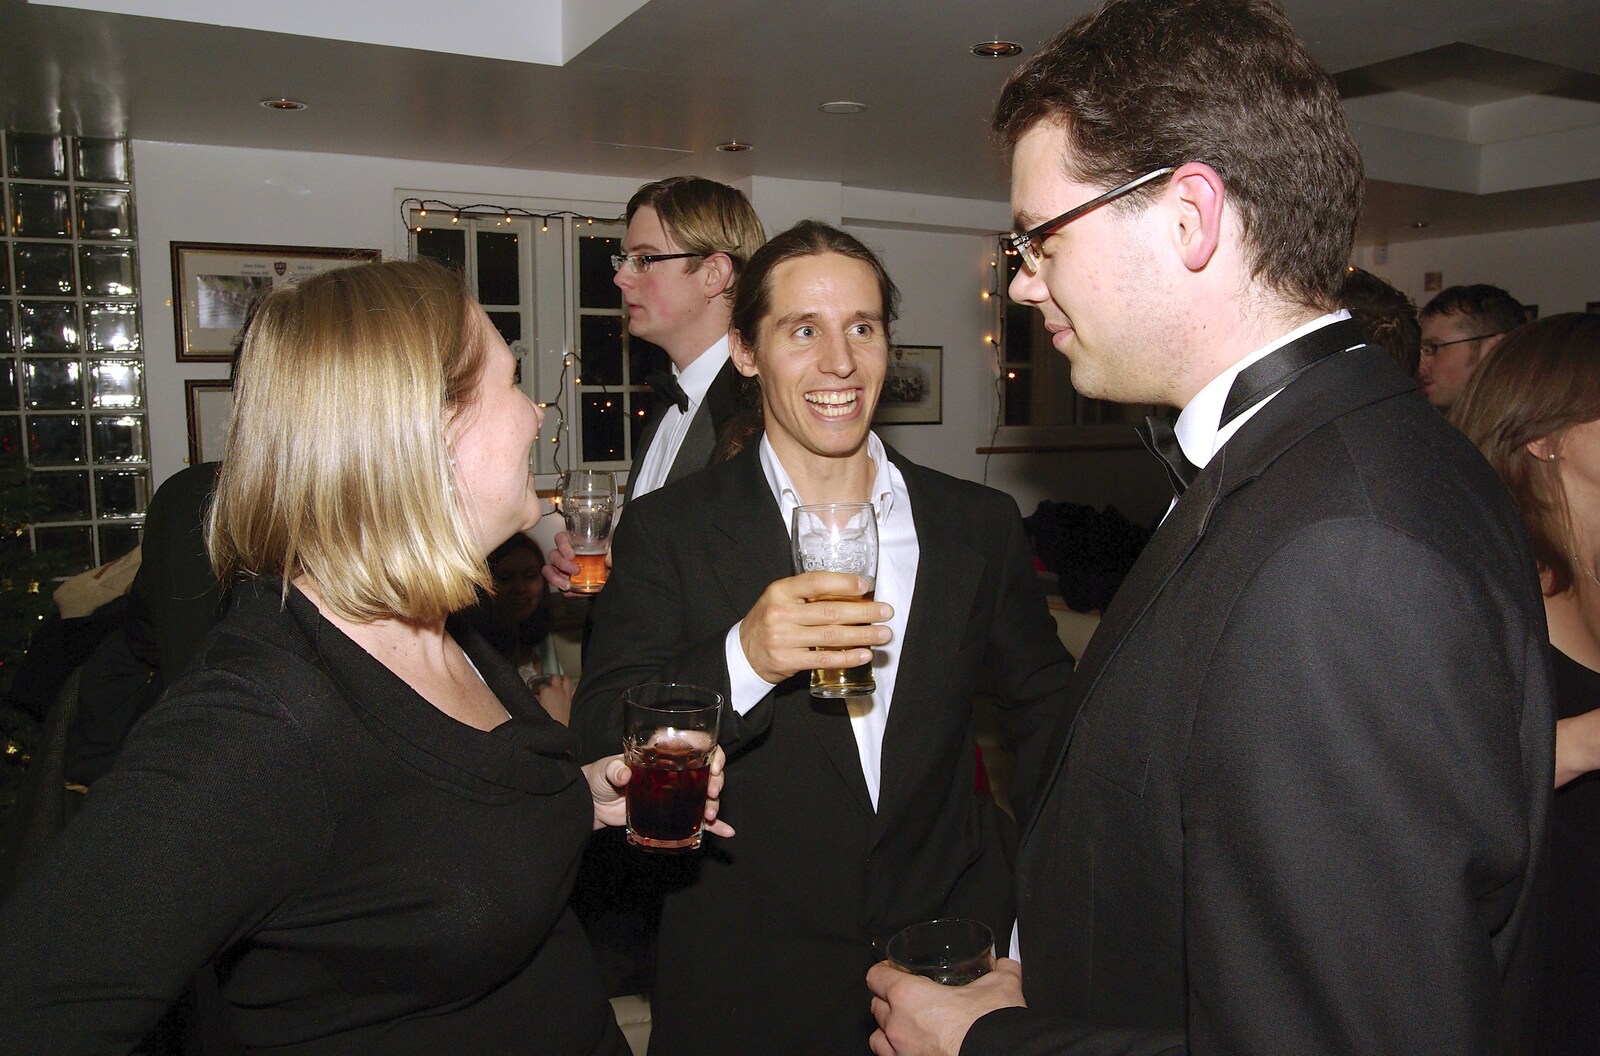 Nadine, Liam and Dave Read from Qualcomm Cambridge's Christmas Do, Jesus College, Cambridge - 20th December 2006